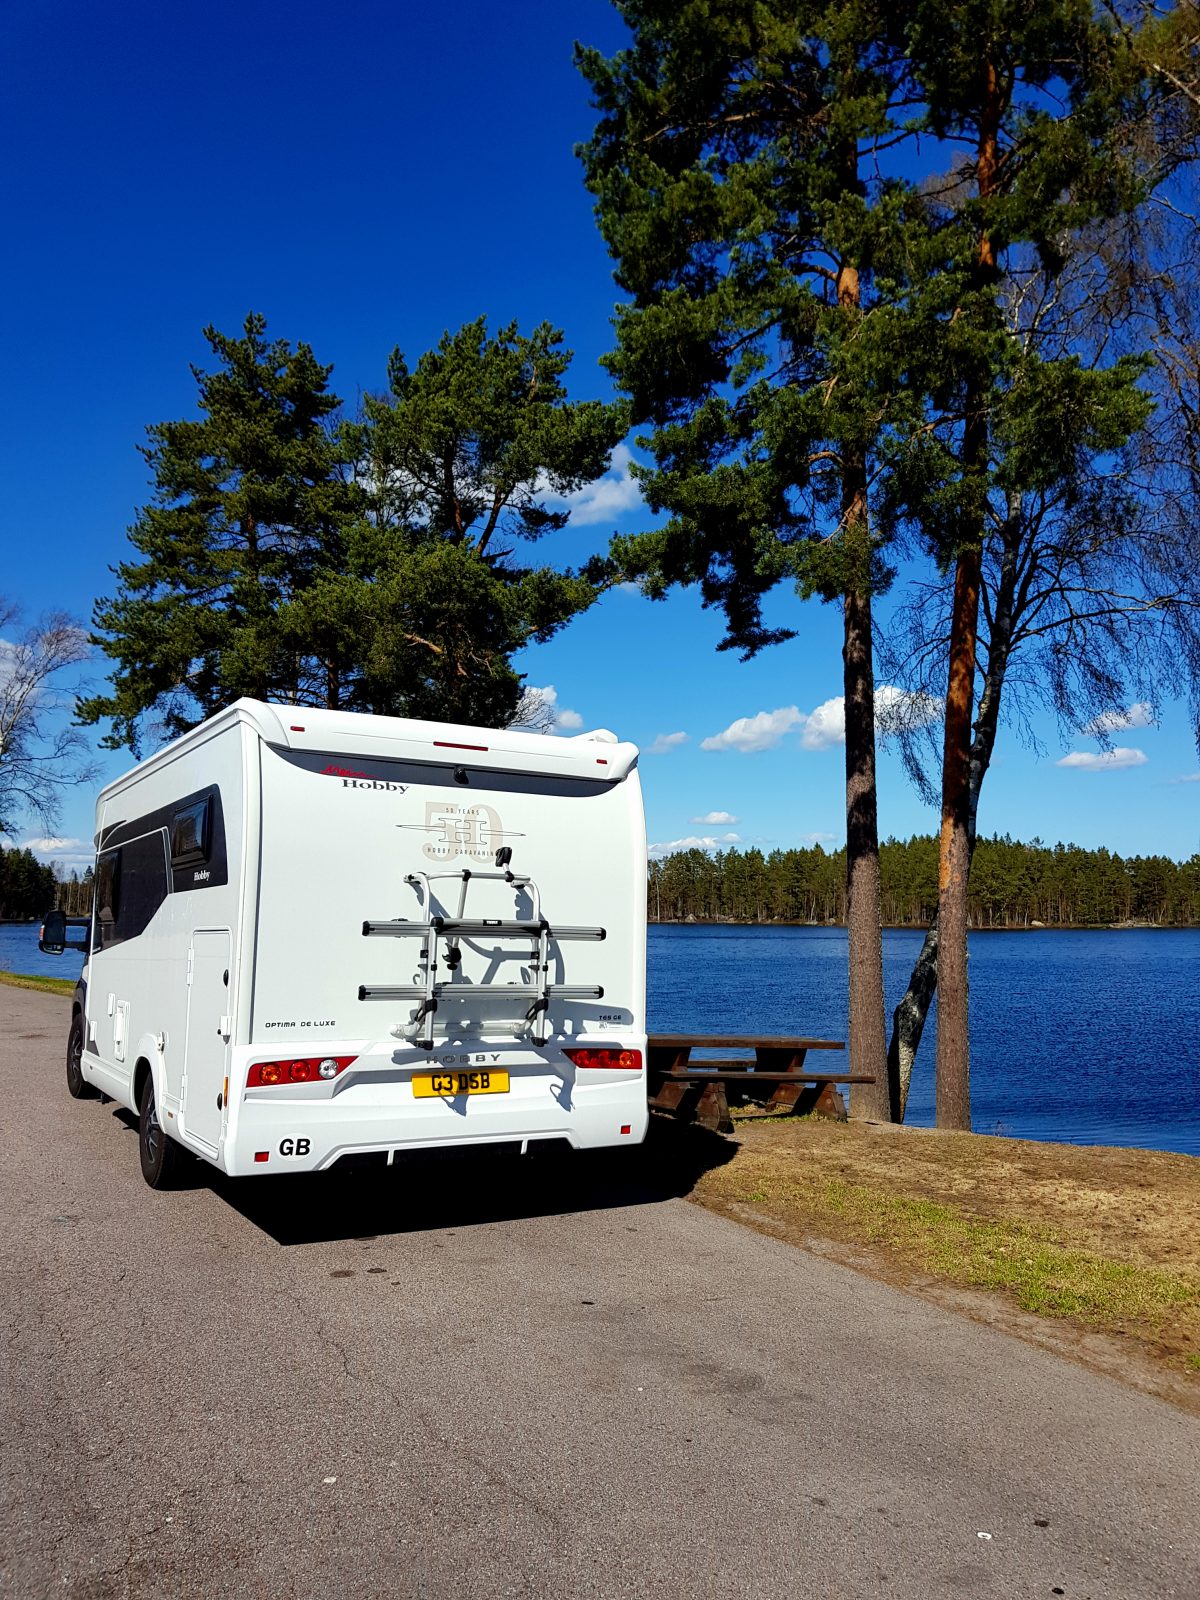 Perfect motorhome touring in Sweden